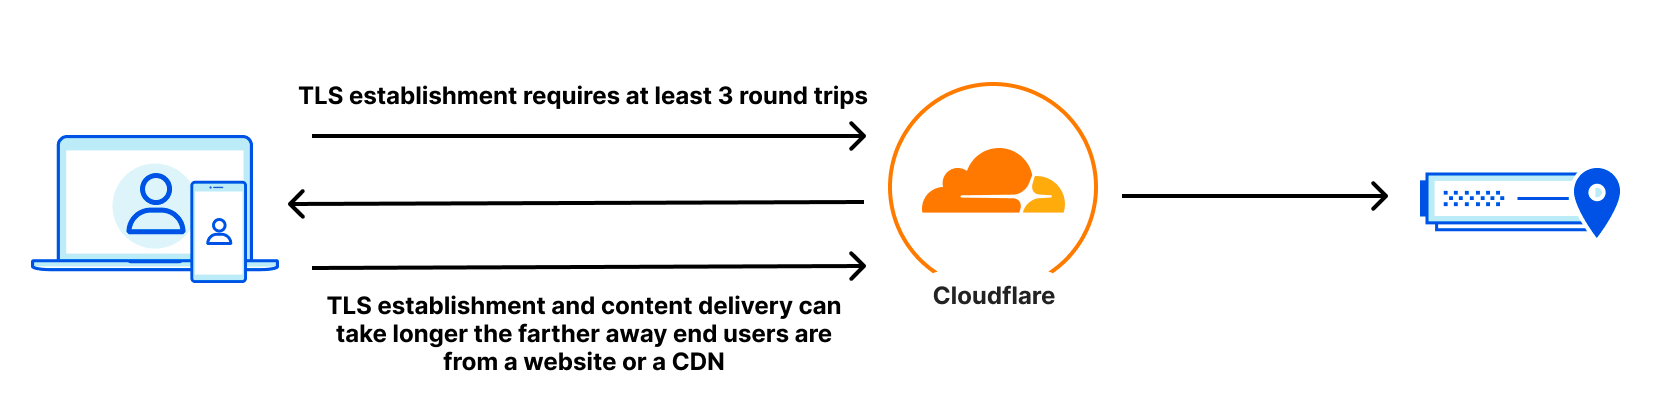 How Cloudflare helps next-generation markets